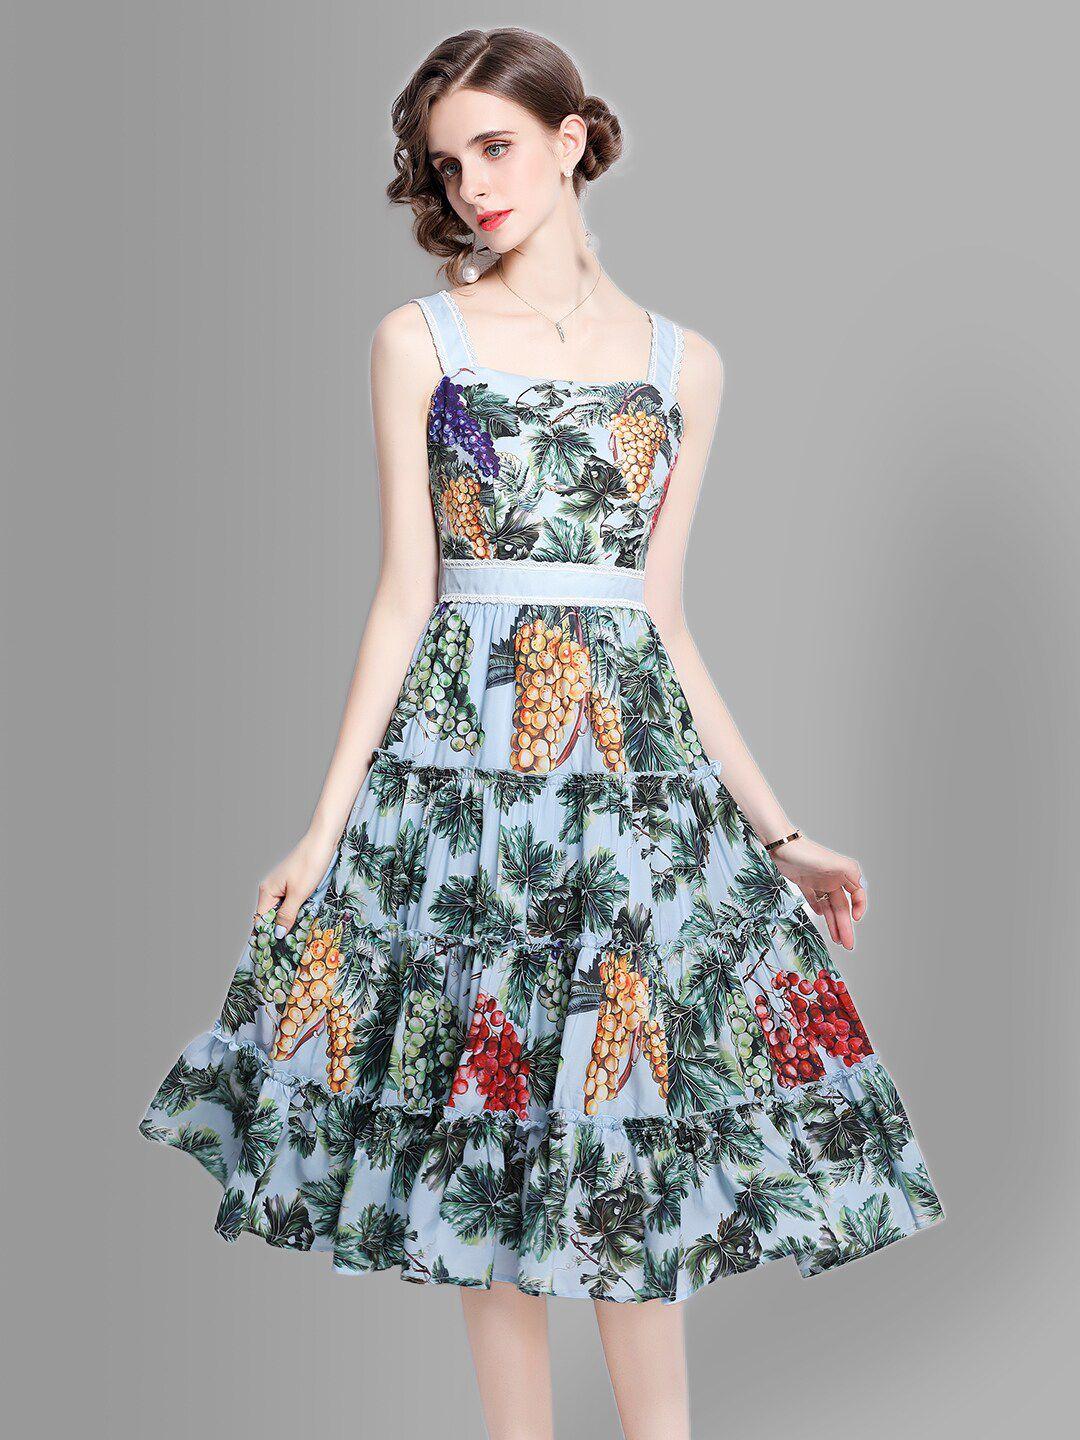 jc collection turquoise blue & green floral midi dress